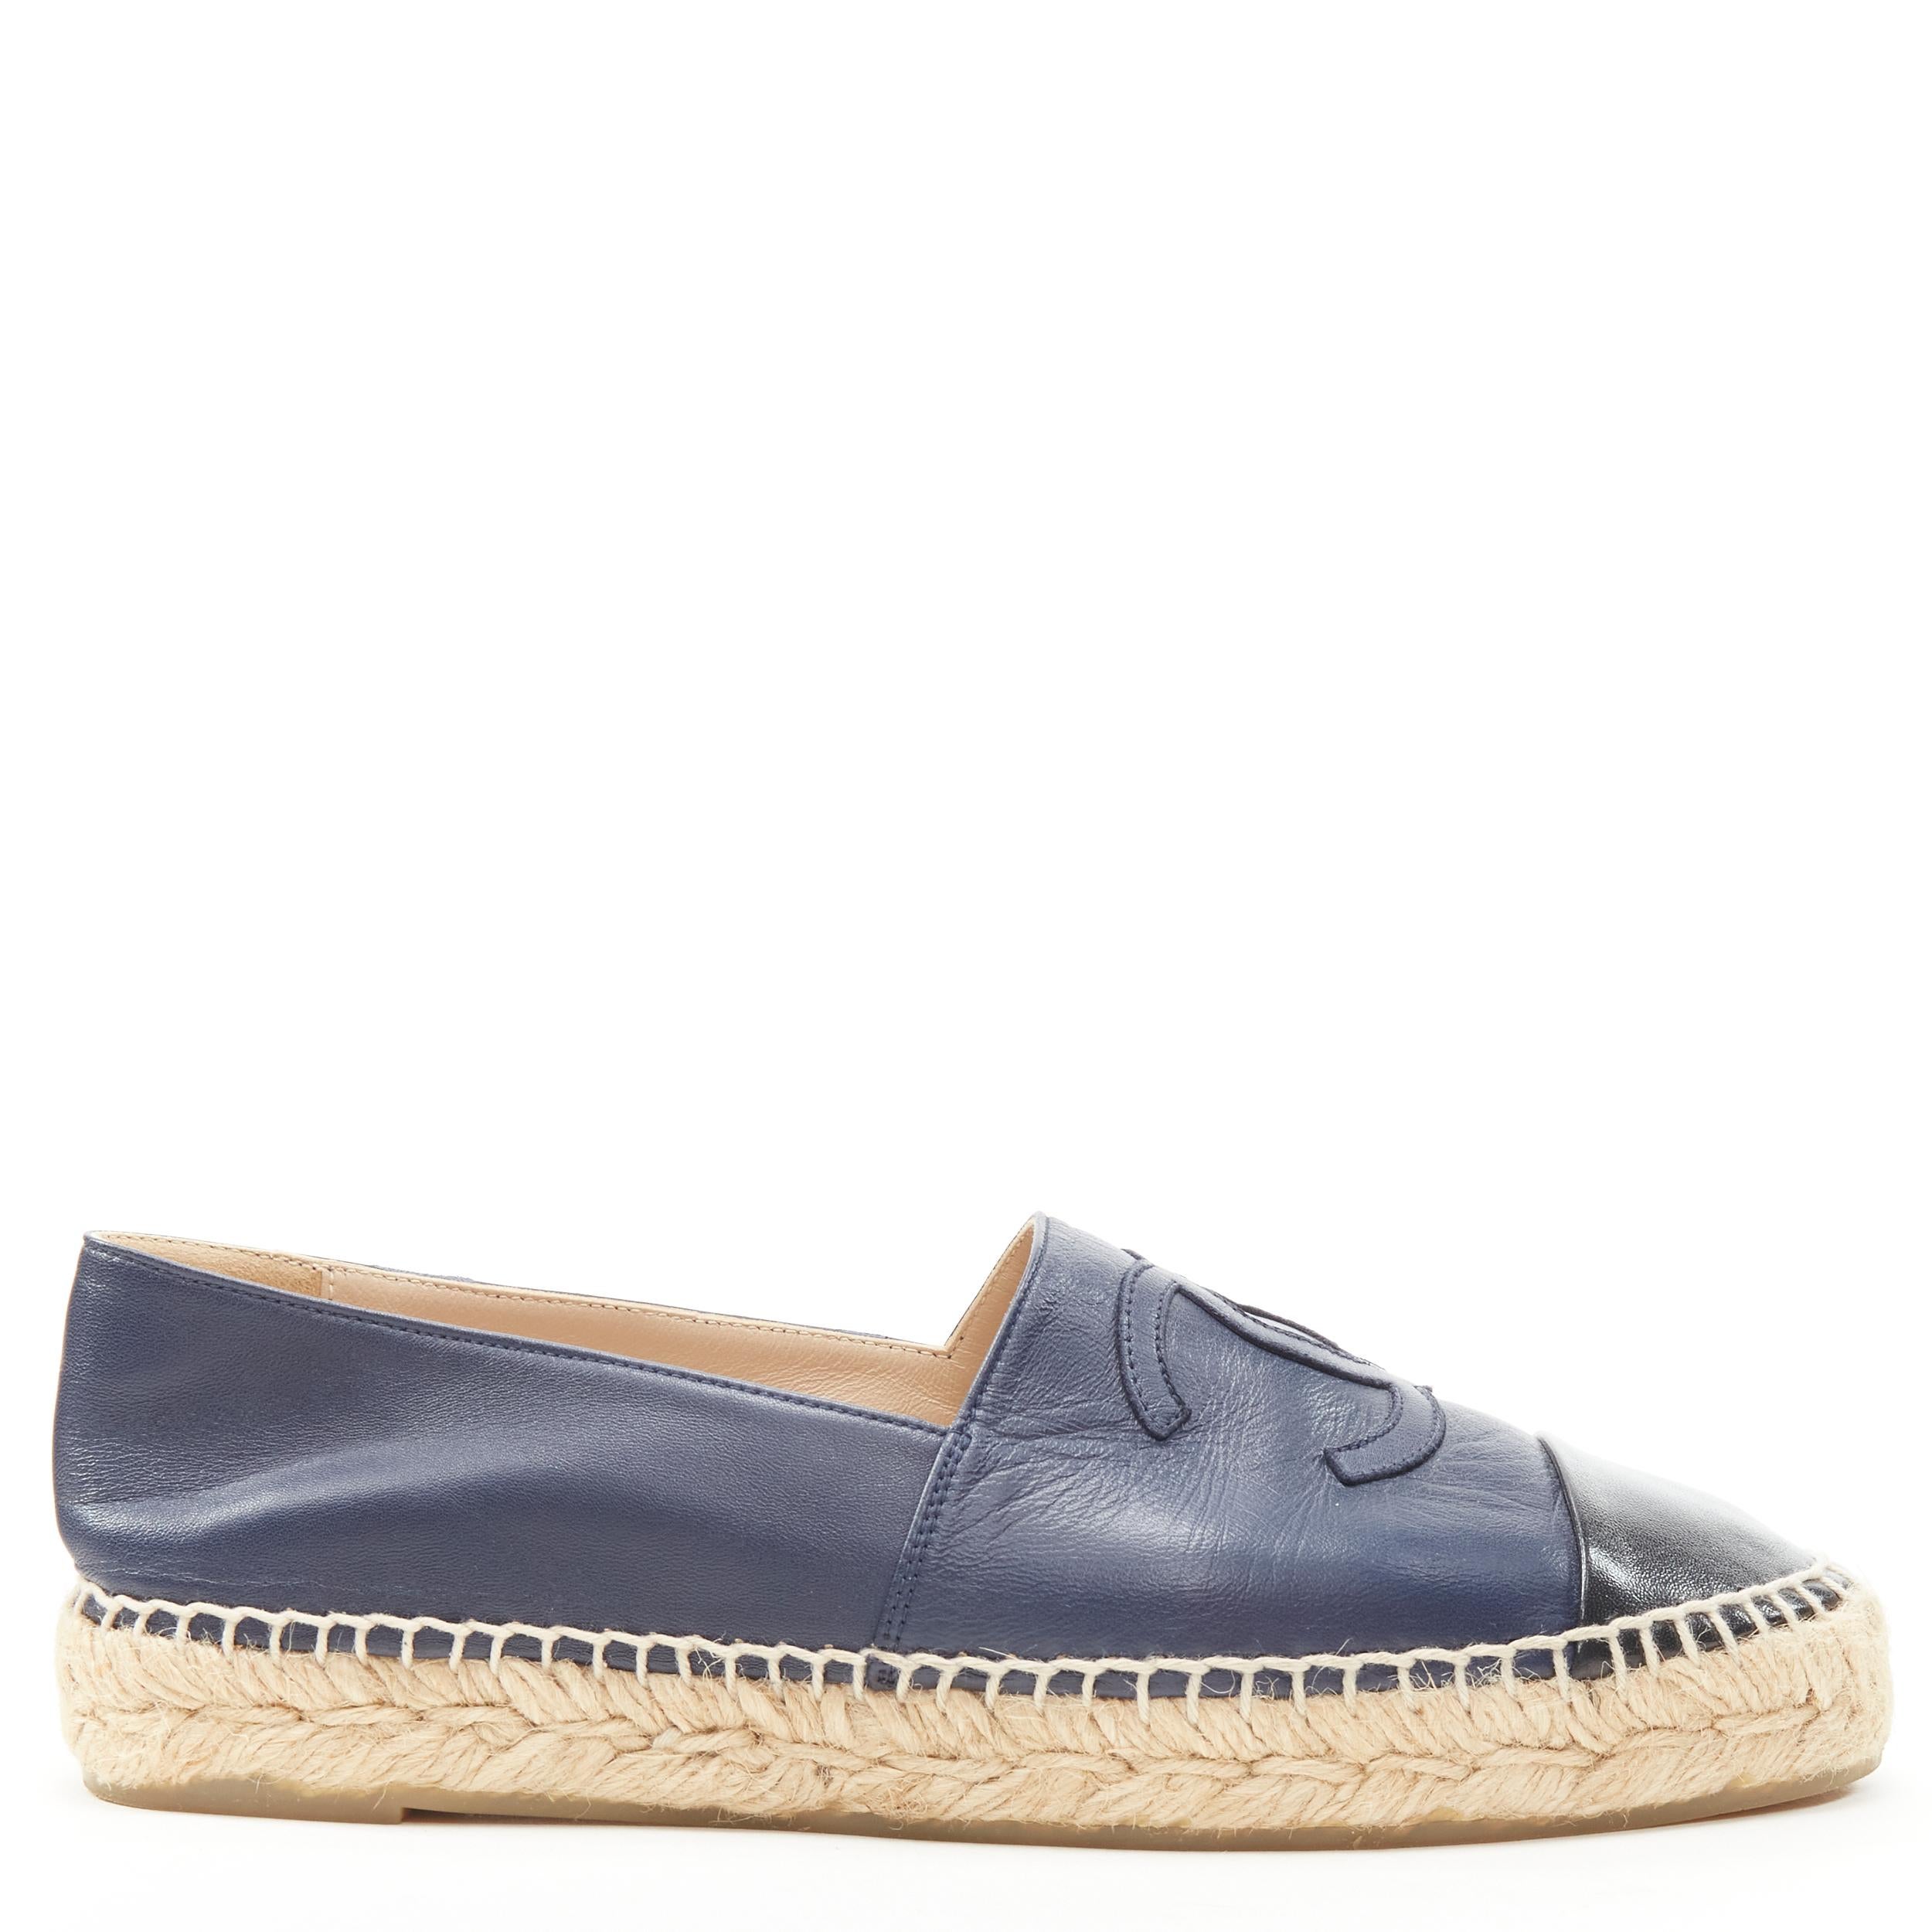 CHANEL CC Logo navy lambskin leather jute espadrilles shoes EU38 US8 
Reference: LNKO/A01927 
Brand: Chanel 
Model: CC Logo espadrilles 
Material: Leather 
Color: Navy 
Pattern: Solid 
Extra Detail: Lambskin leather. CC logo at top. Jute espadrille.